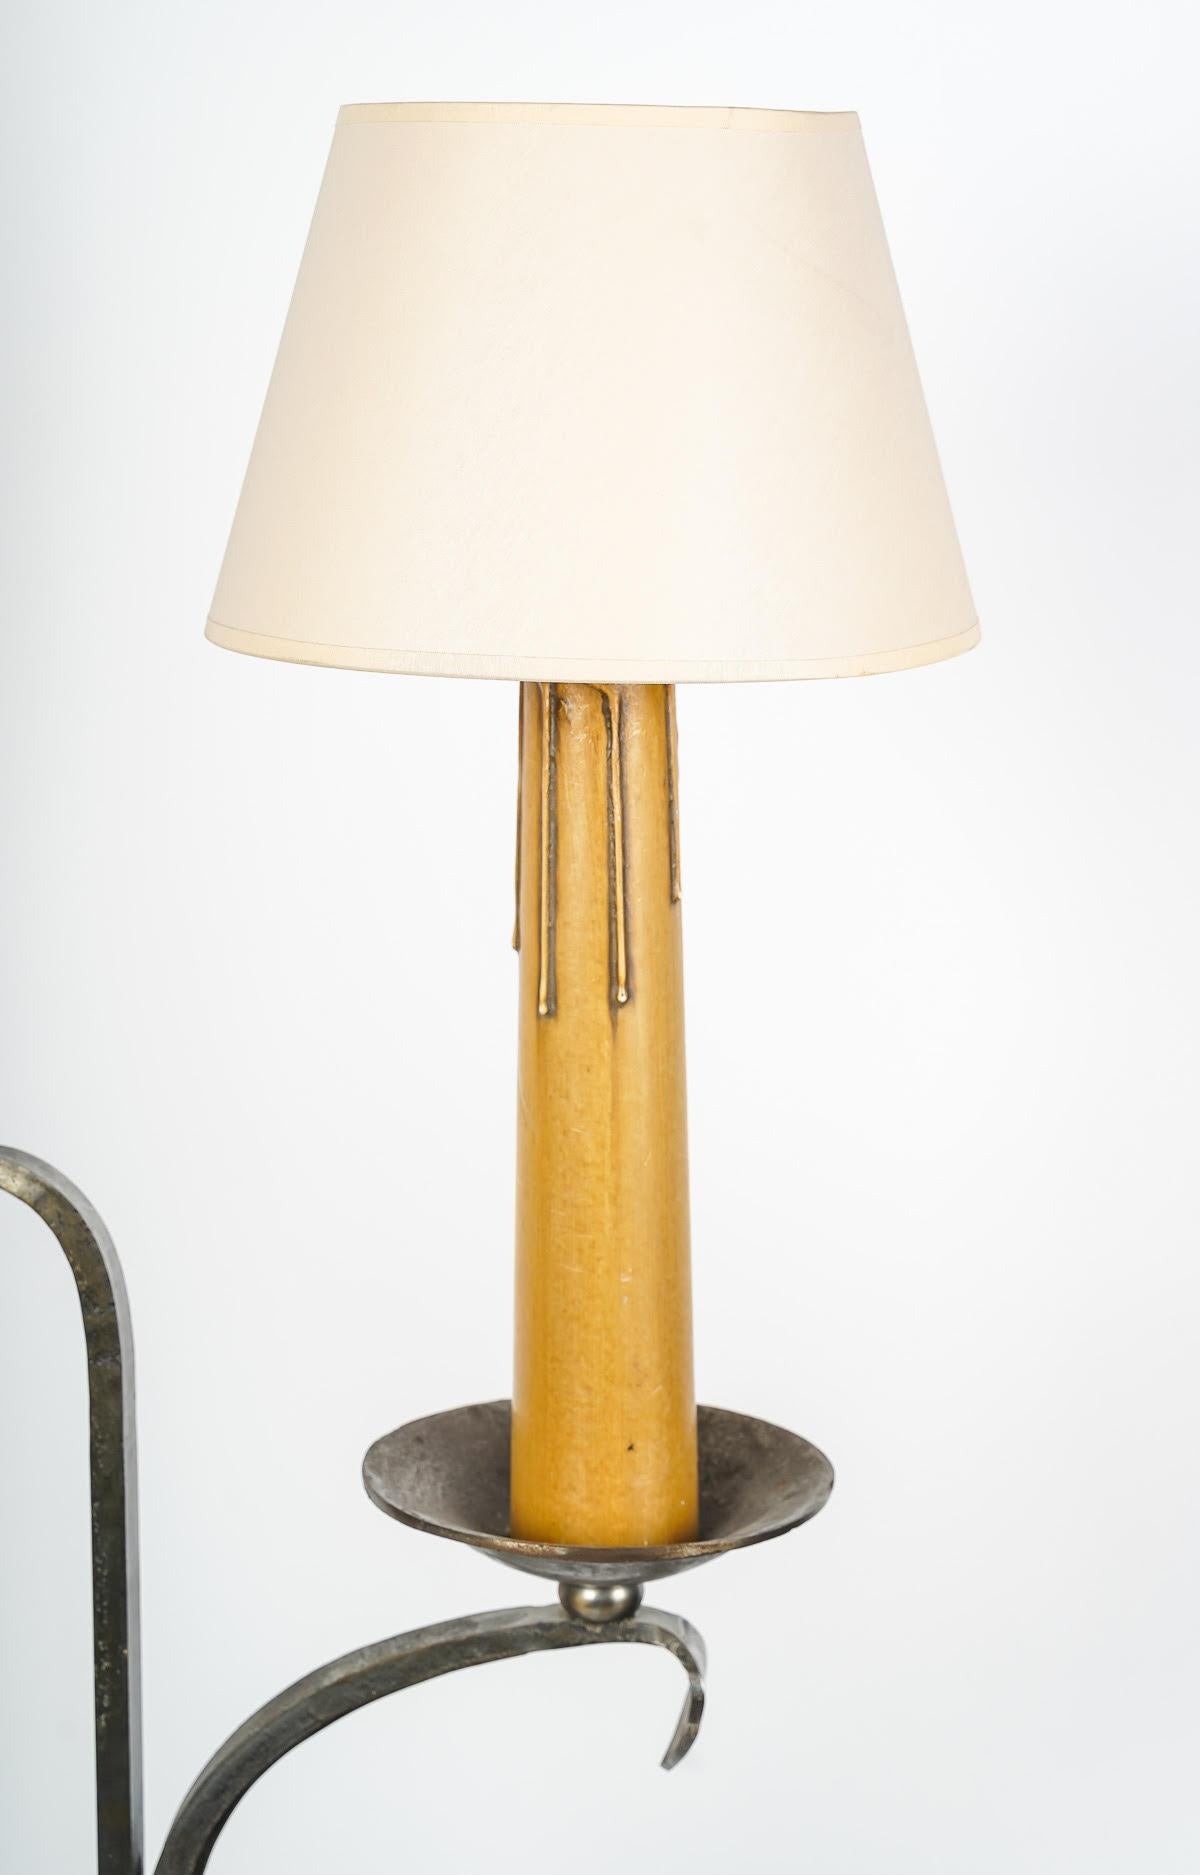 French Wrought Iron and Copper Floor Lamp from the 1960s For Sale